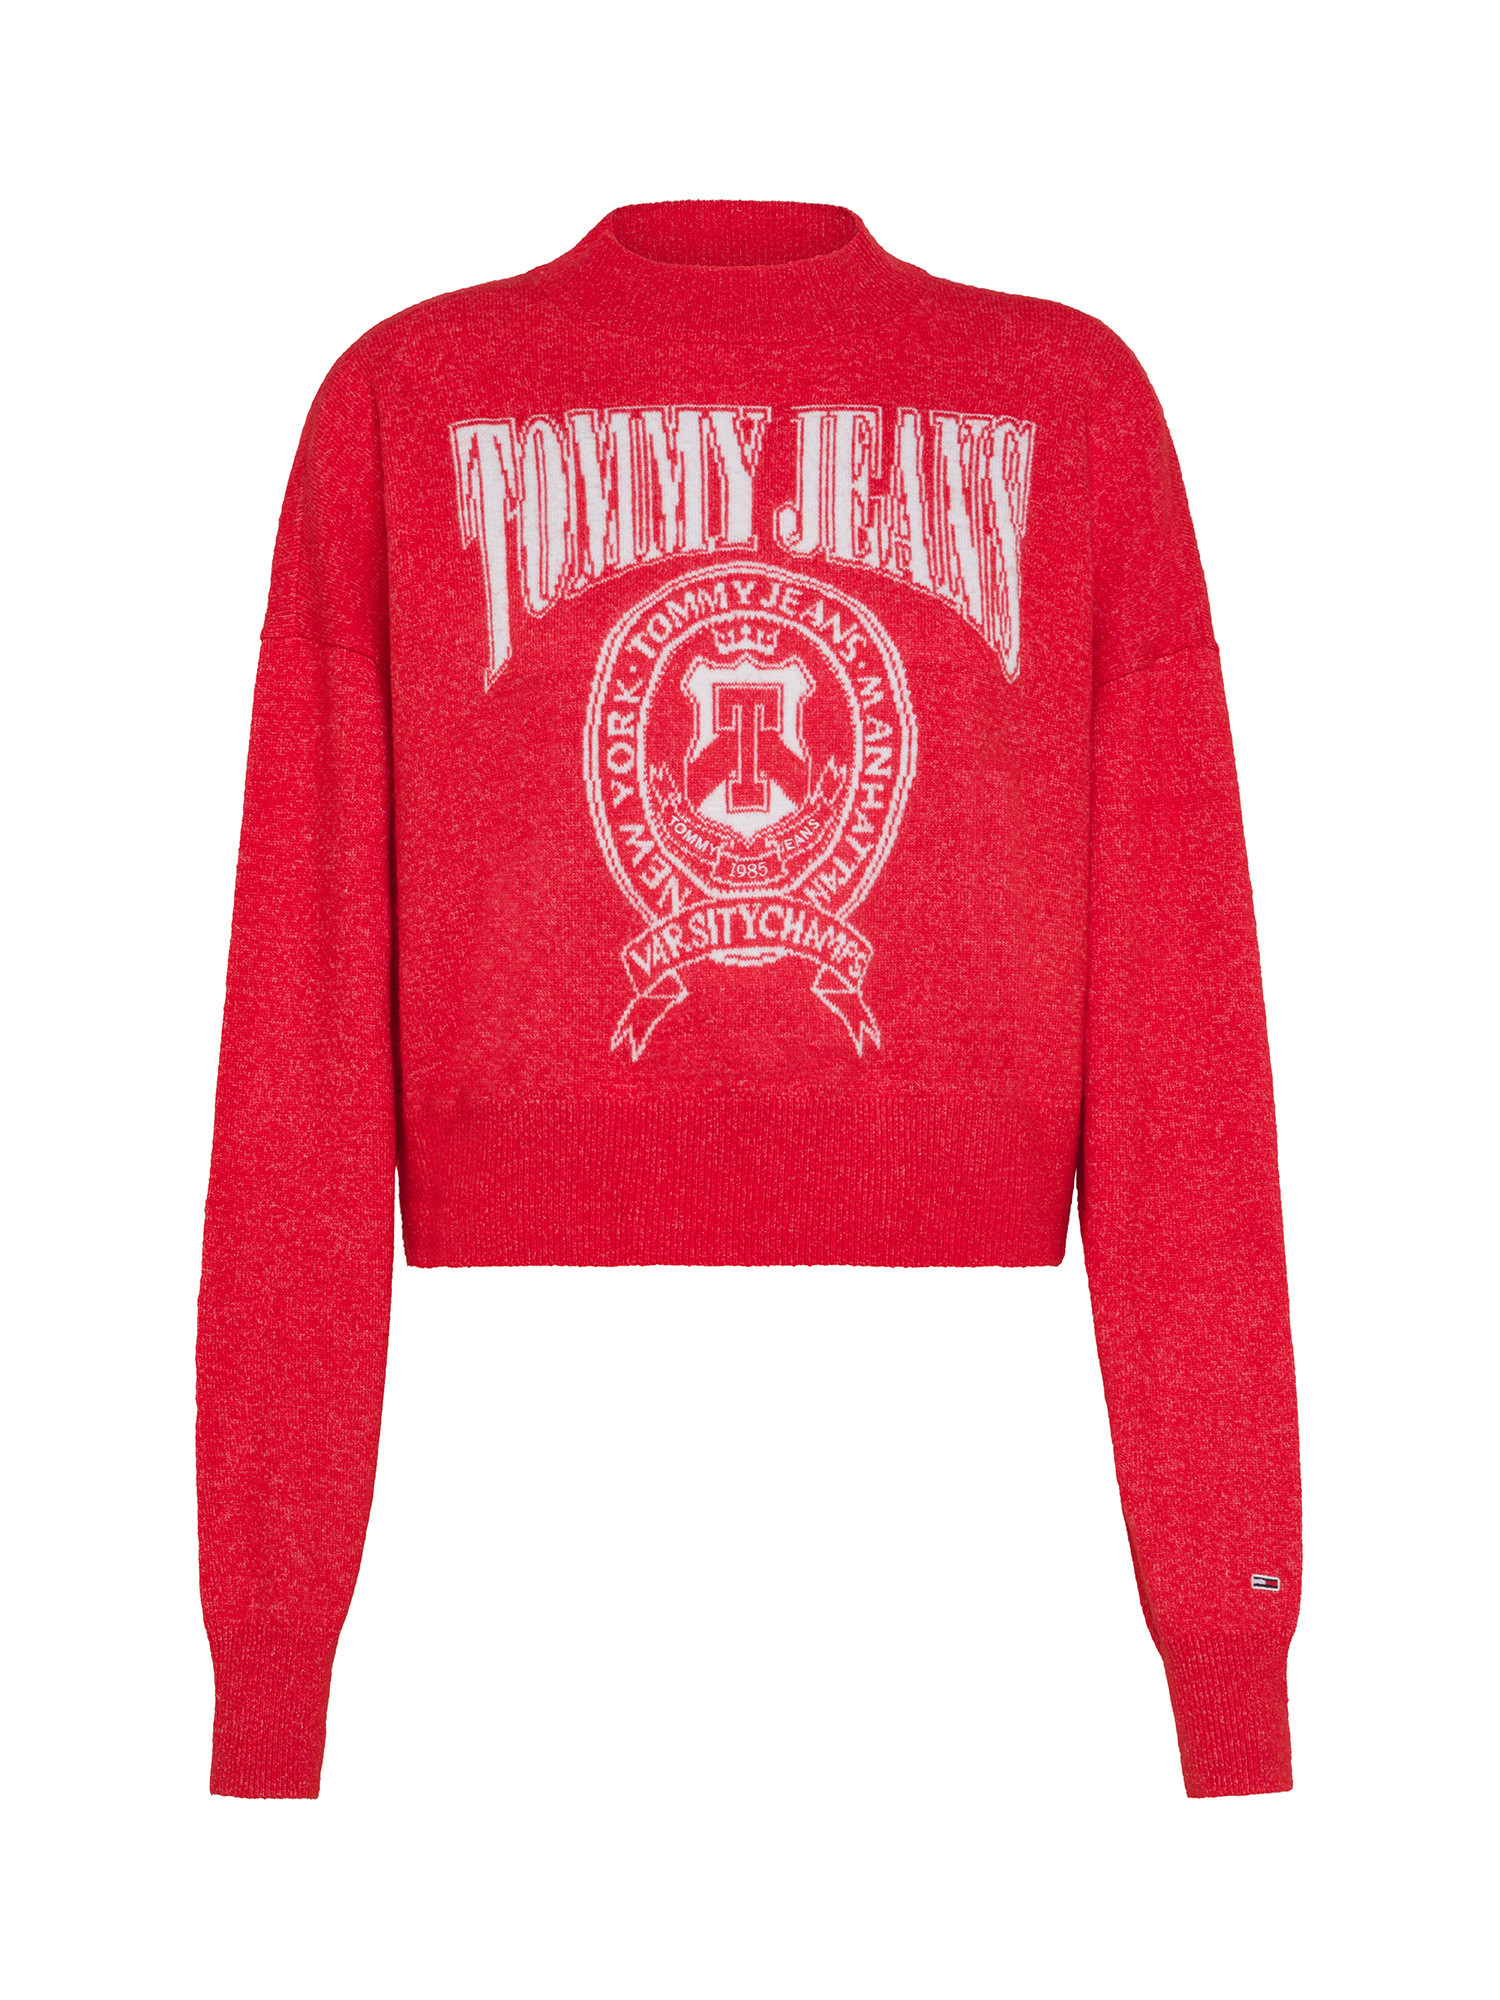 Tommy Jeans - Pullover collo alto con logo, Rosso, large image number 0